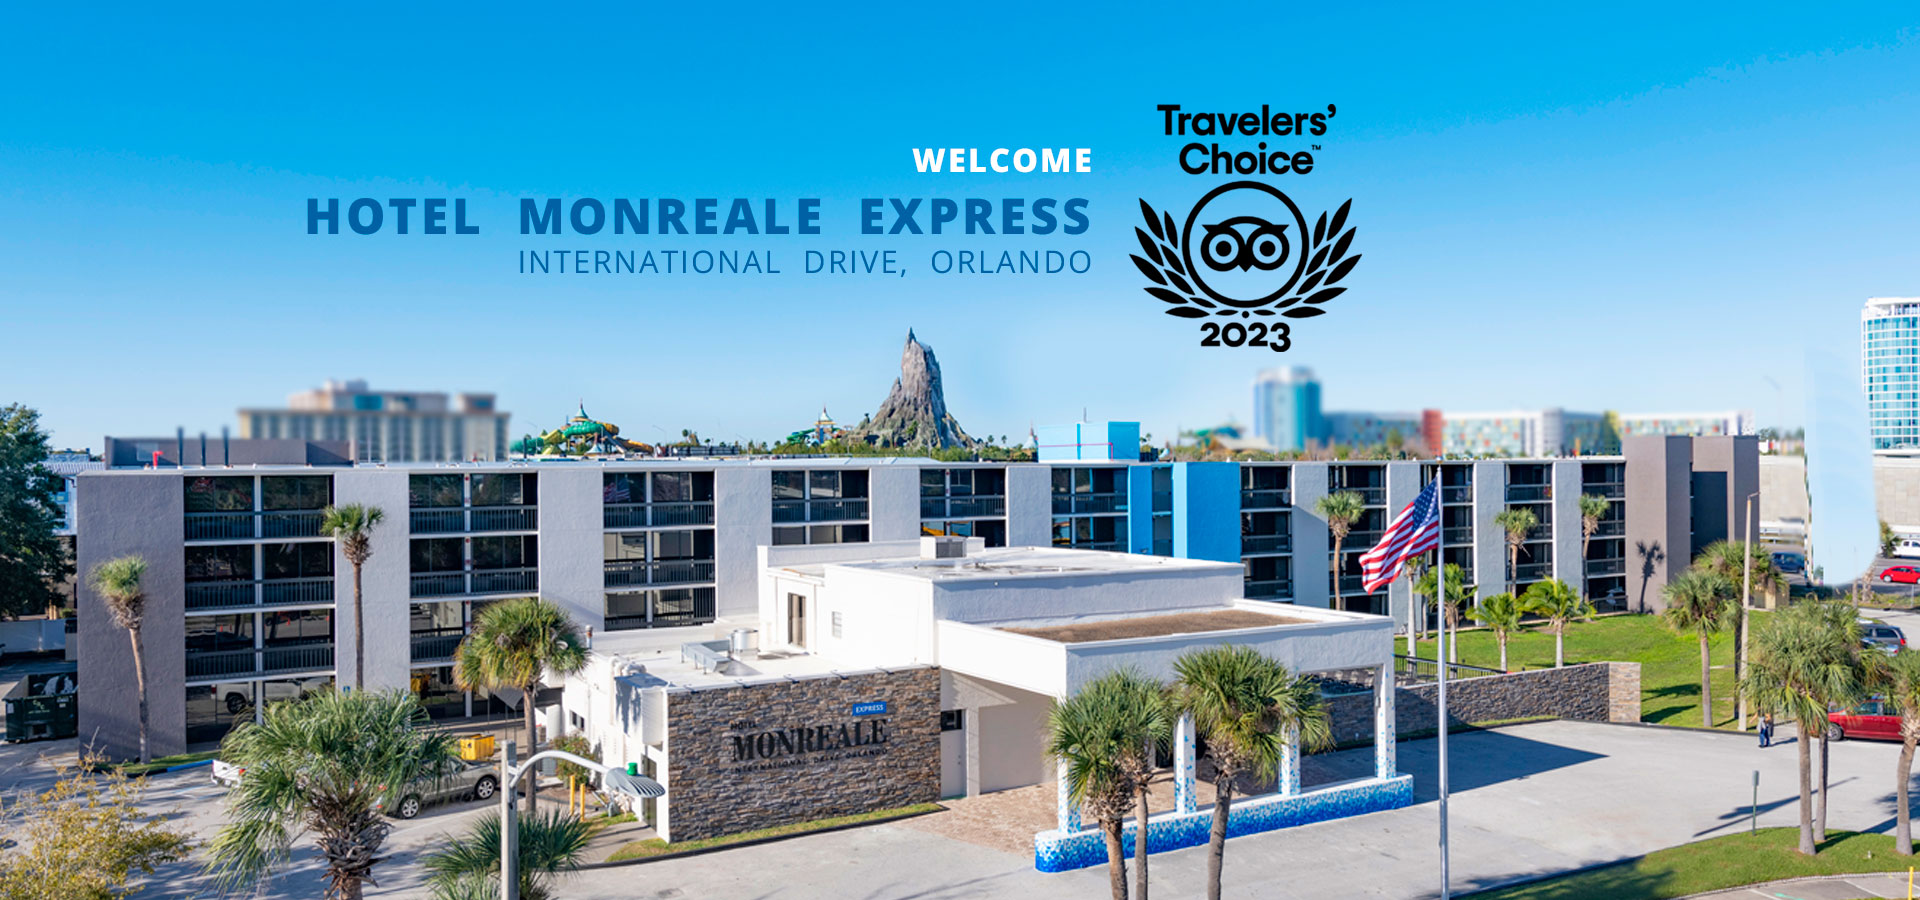 Hotel Monreale Express I-Drive Orlando - . Any pancake lover in